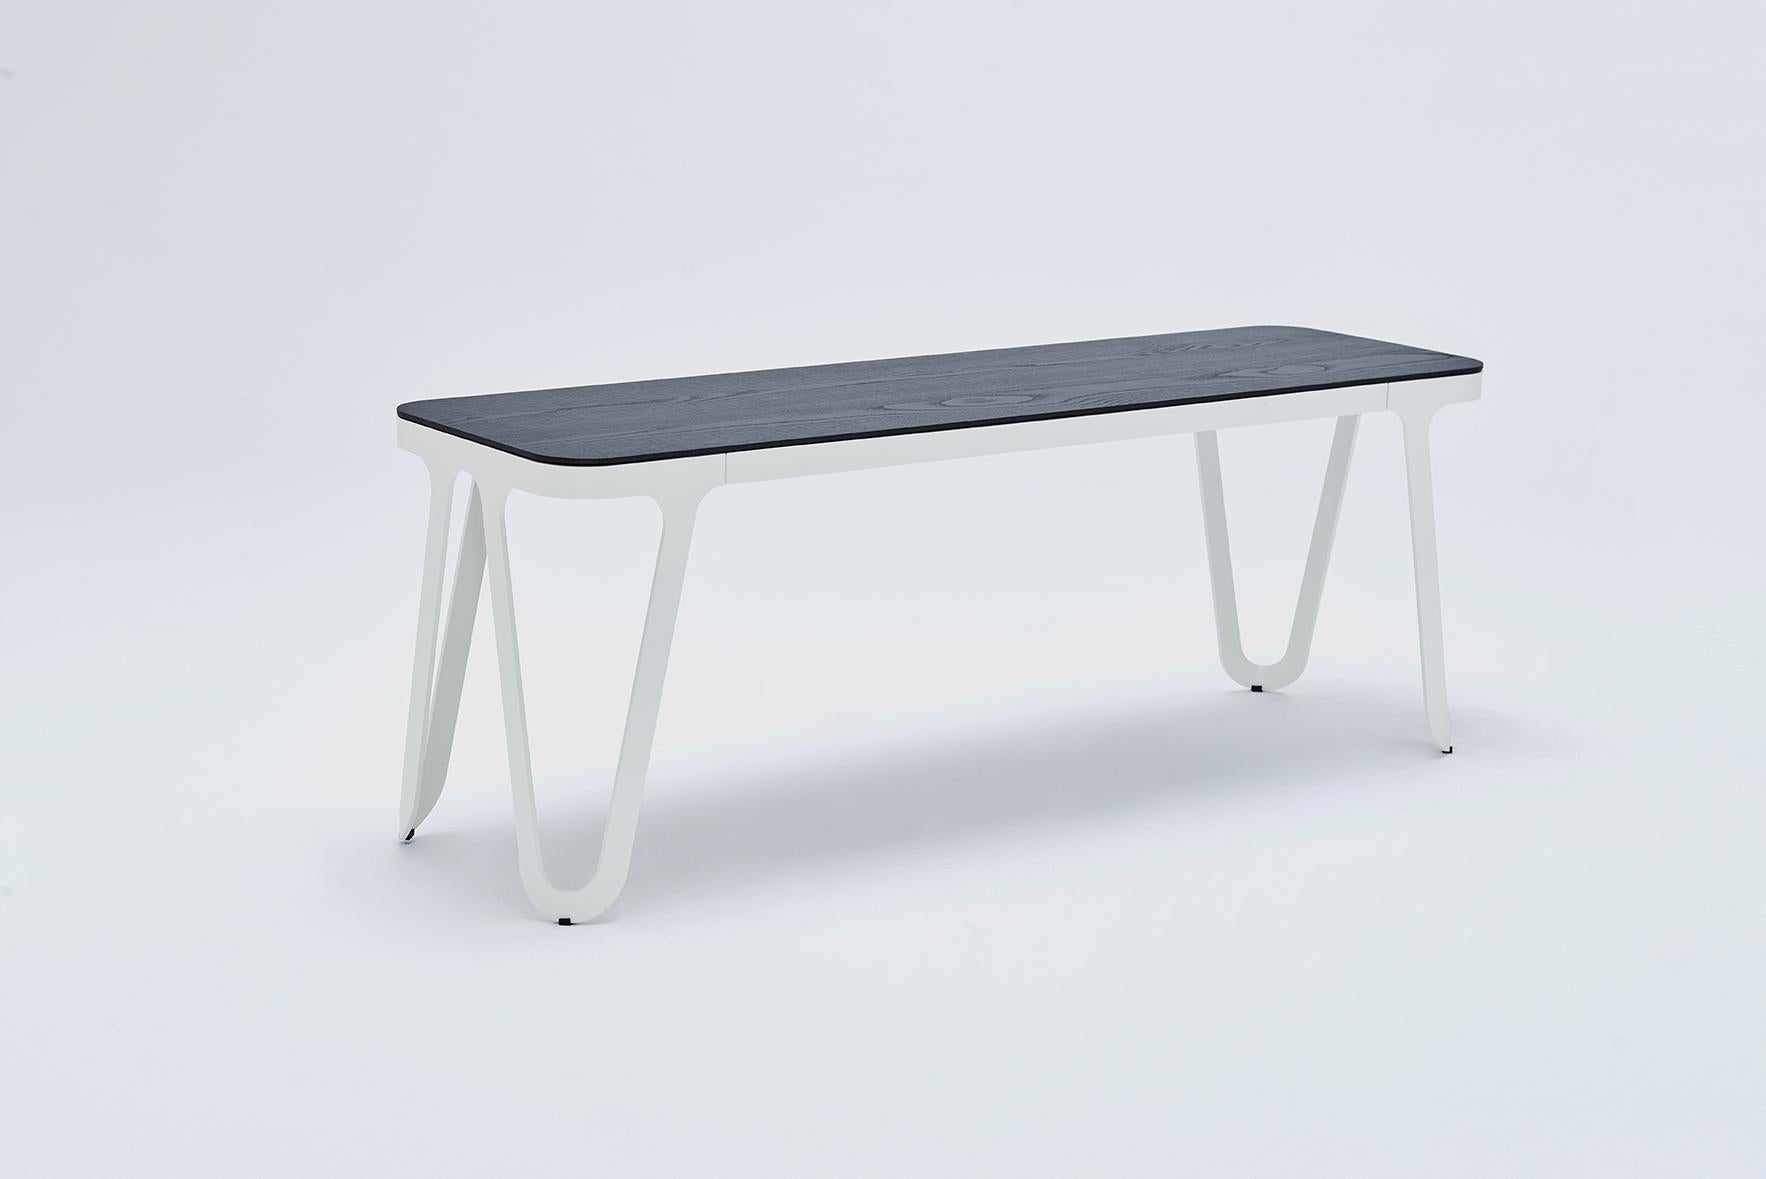 Loop bench 160 Oak by Sebastian Scherer
Material: aluminium, oak
Dimensions: D160x W38 x H45 cm.
Weight: 20.4 kg
Also available: colors: solid wood (matt lacquered): black and white stained ash / natural oak / american walnut
frame (matt): snow